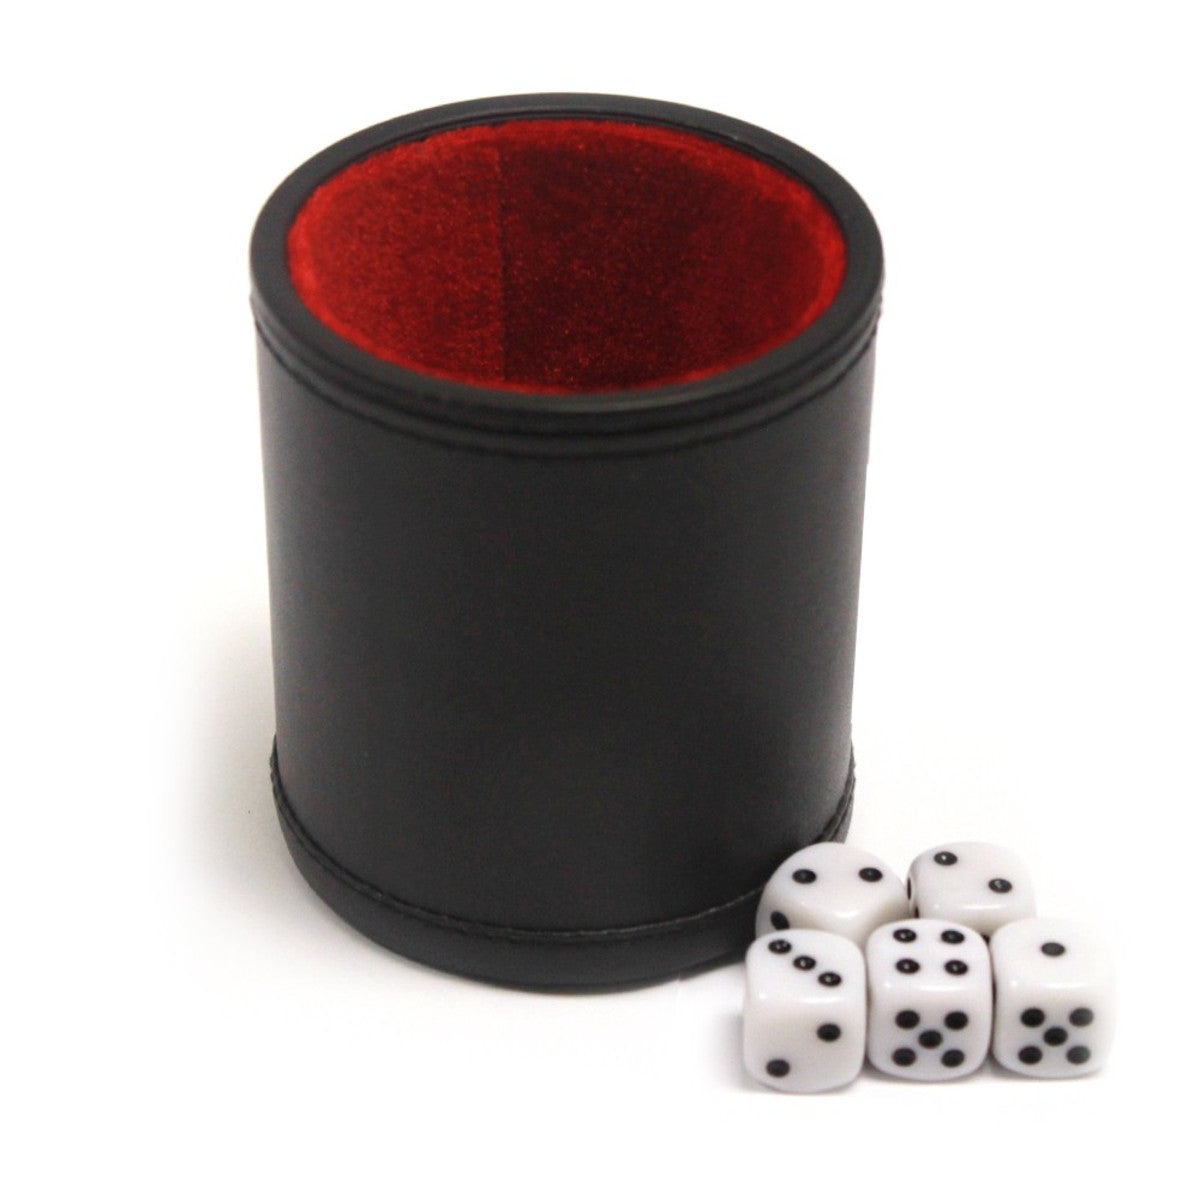 Professional Dice Cup With 5 Dice    